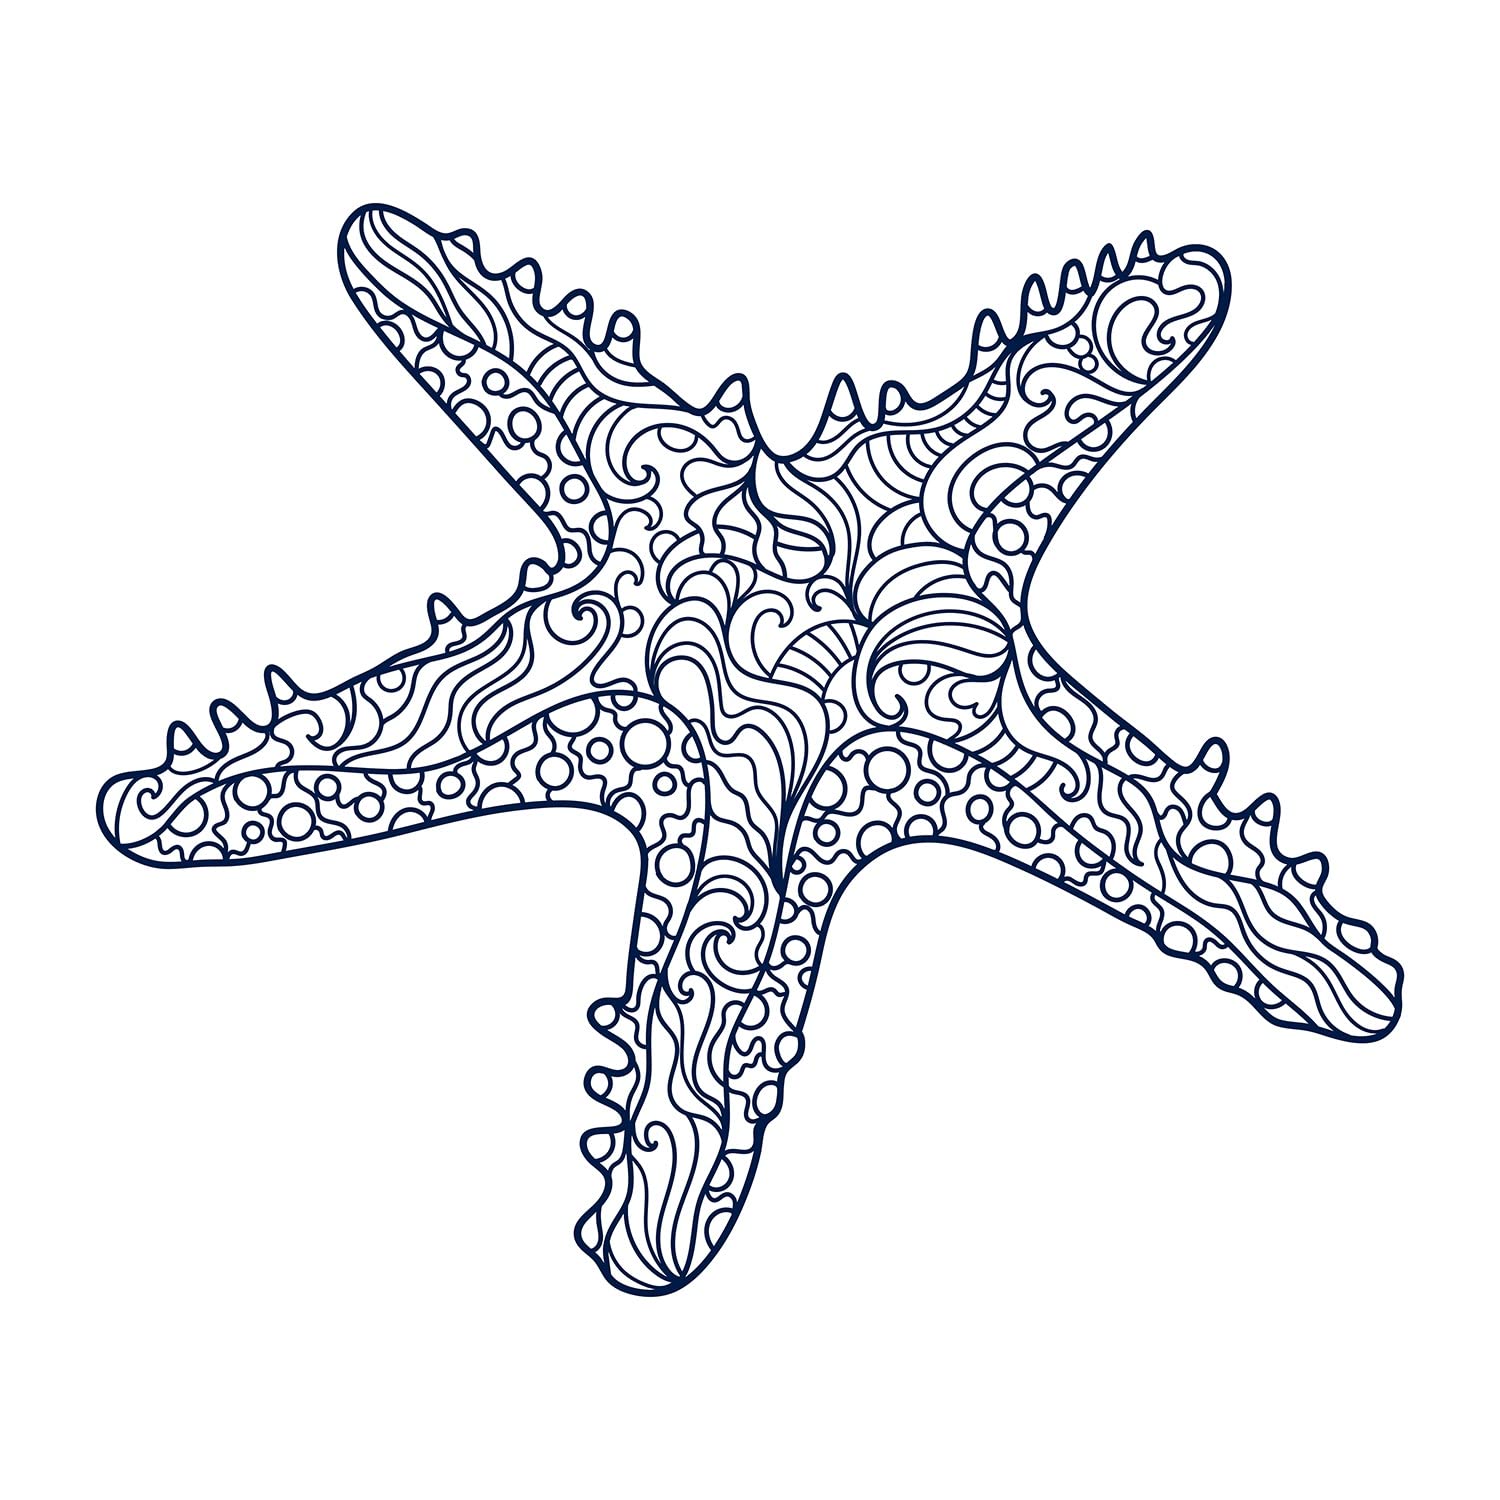 Sea juice temporary tattoo ink semi permanent for adults woman starfish sea animal coloring book for adults stress co navy blue that look real men women chest neck arm